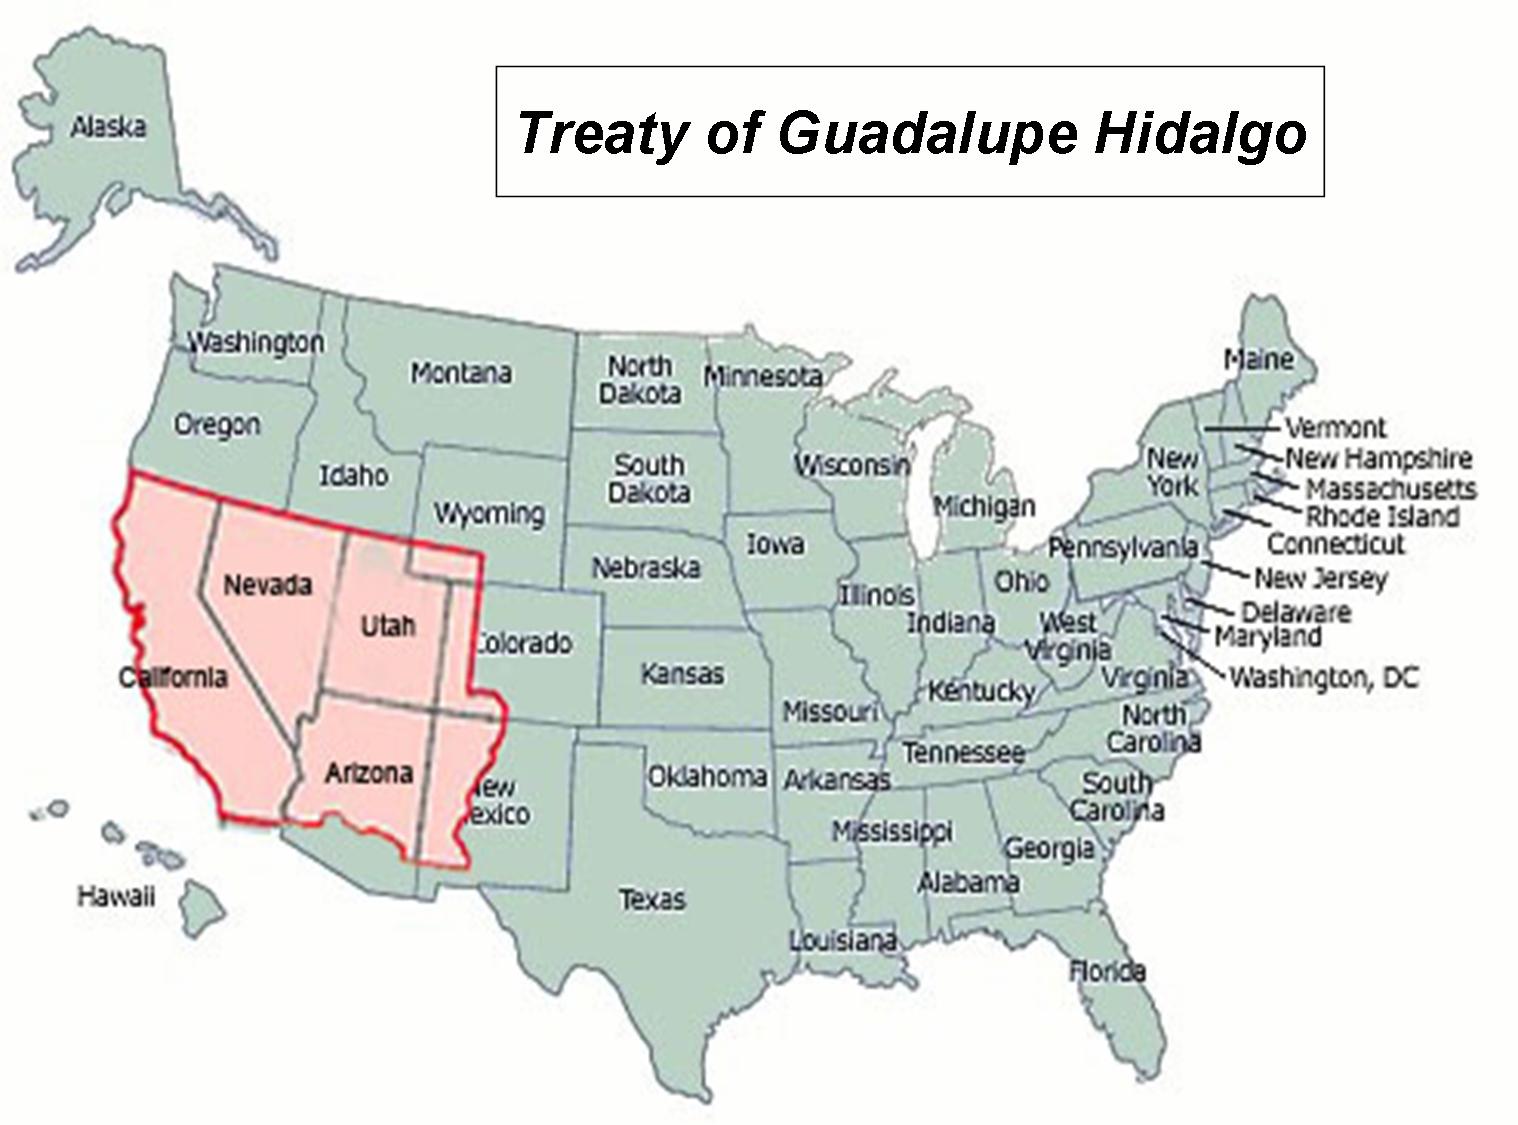 February 2 The Signing of the Treaty of Guadalupe Hidalgo